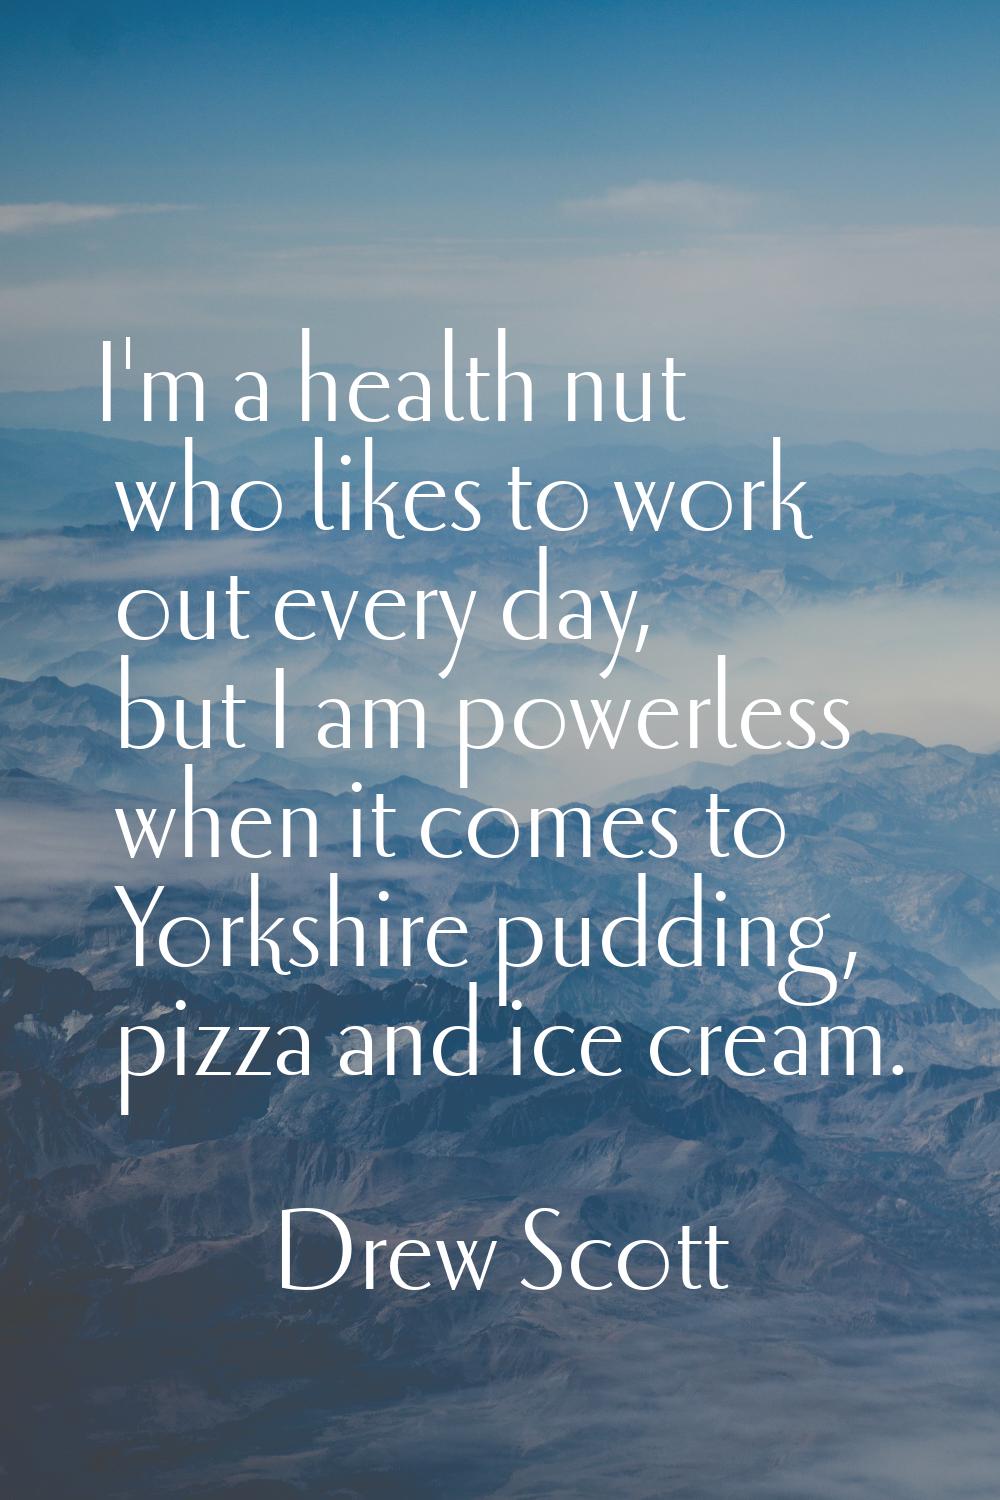 I'm a health nut who likes to work out every day, but I am powerless when it comes to Yorkshire pud